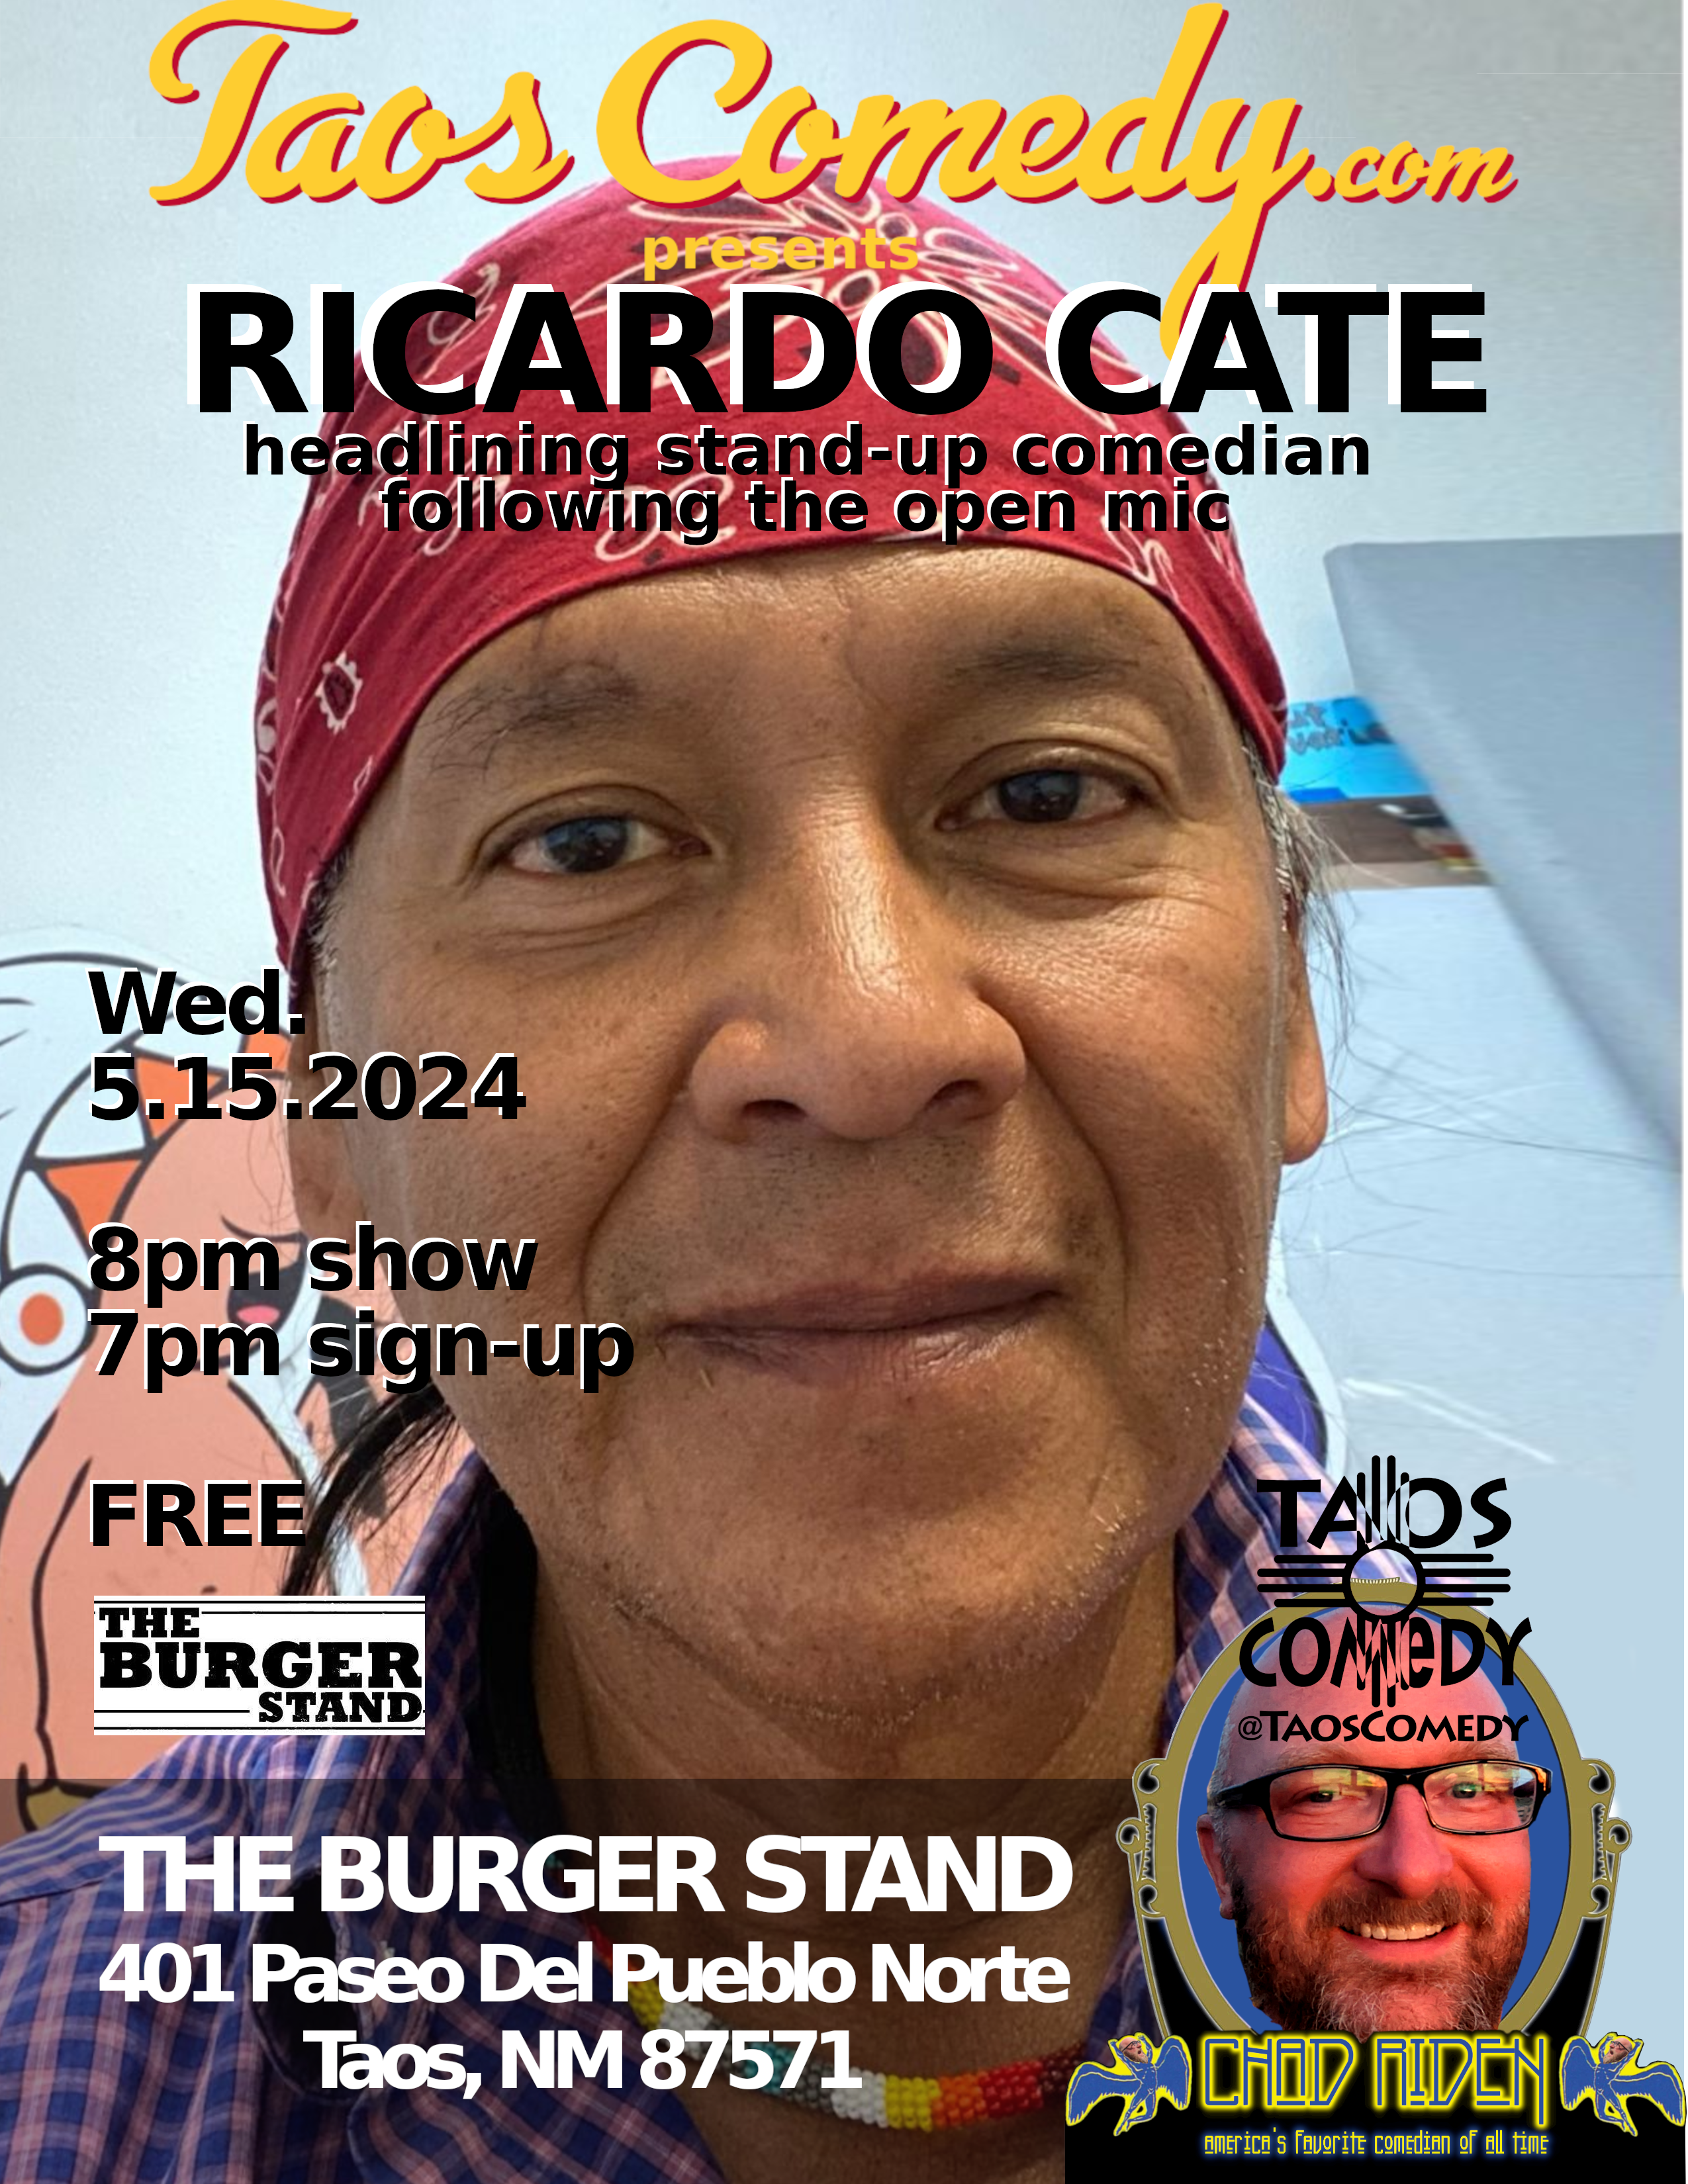 Ricardo Caté headlines the open mic at The Burger Stand 5/15/2024